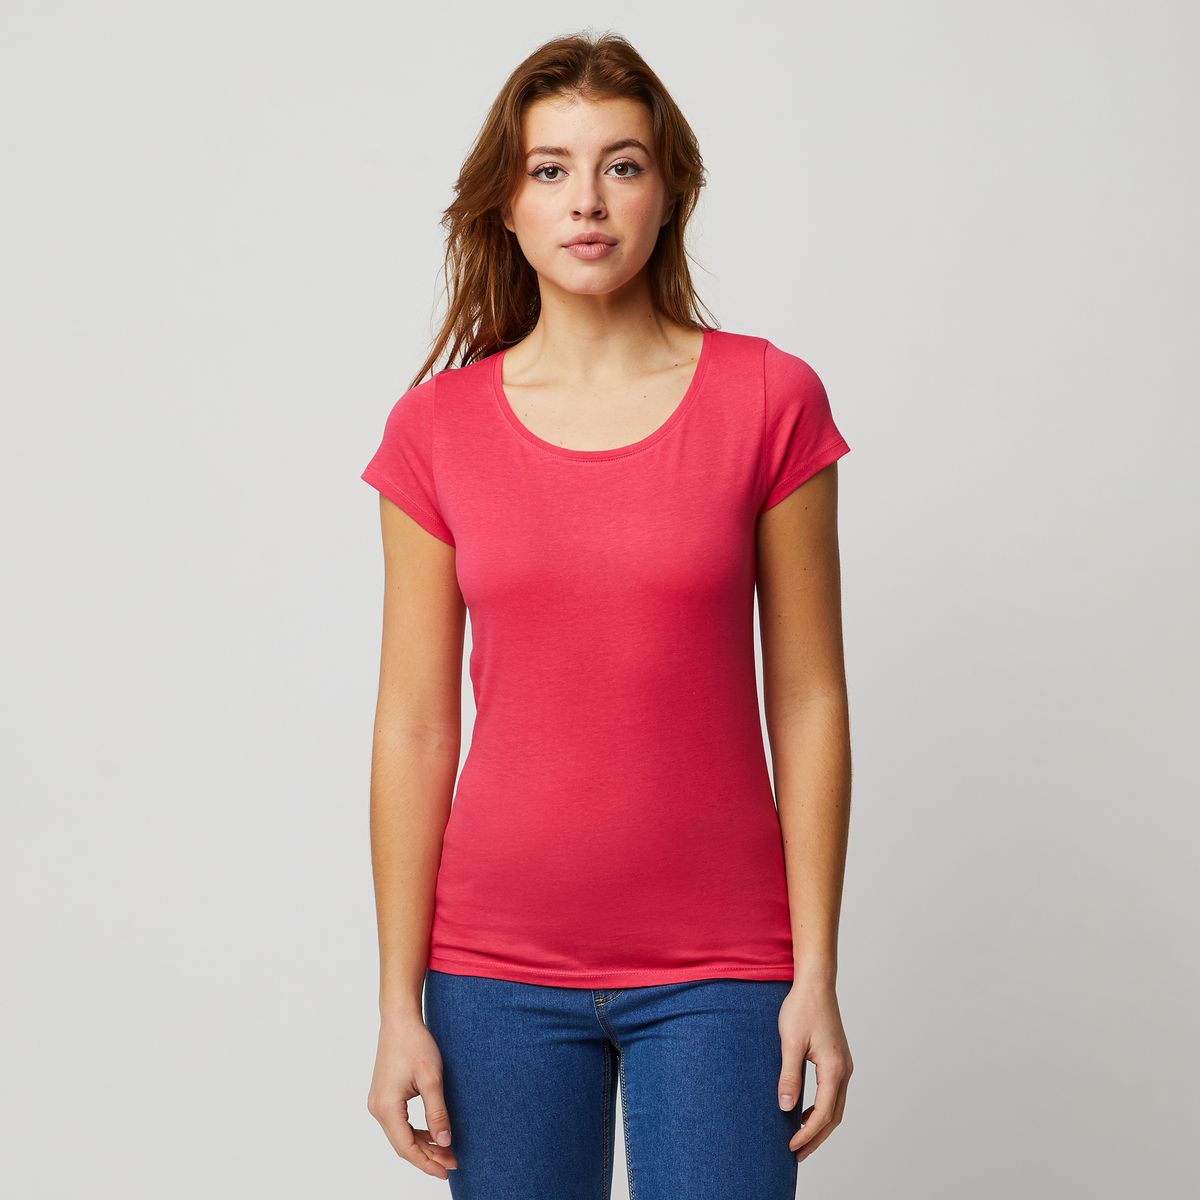 INEXTENSO T-shirt manches courtes femme